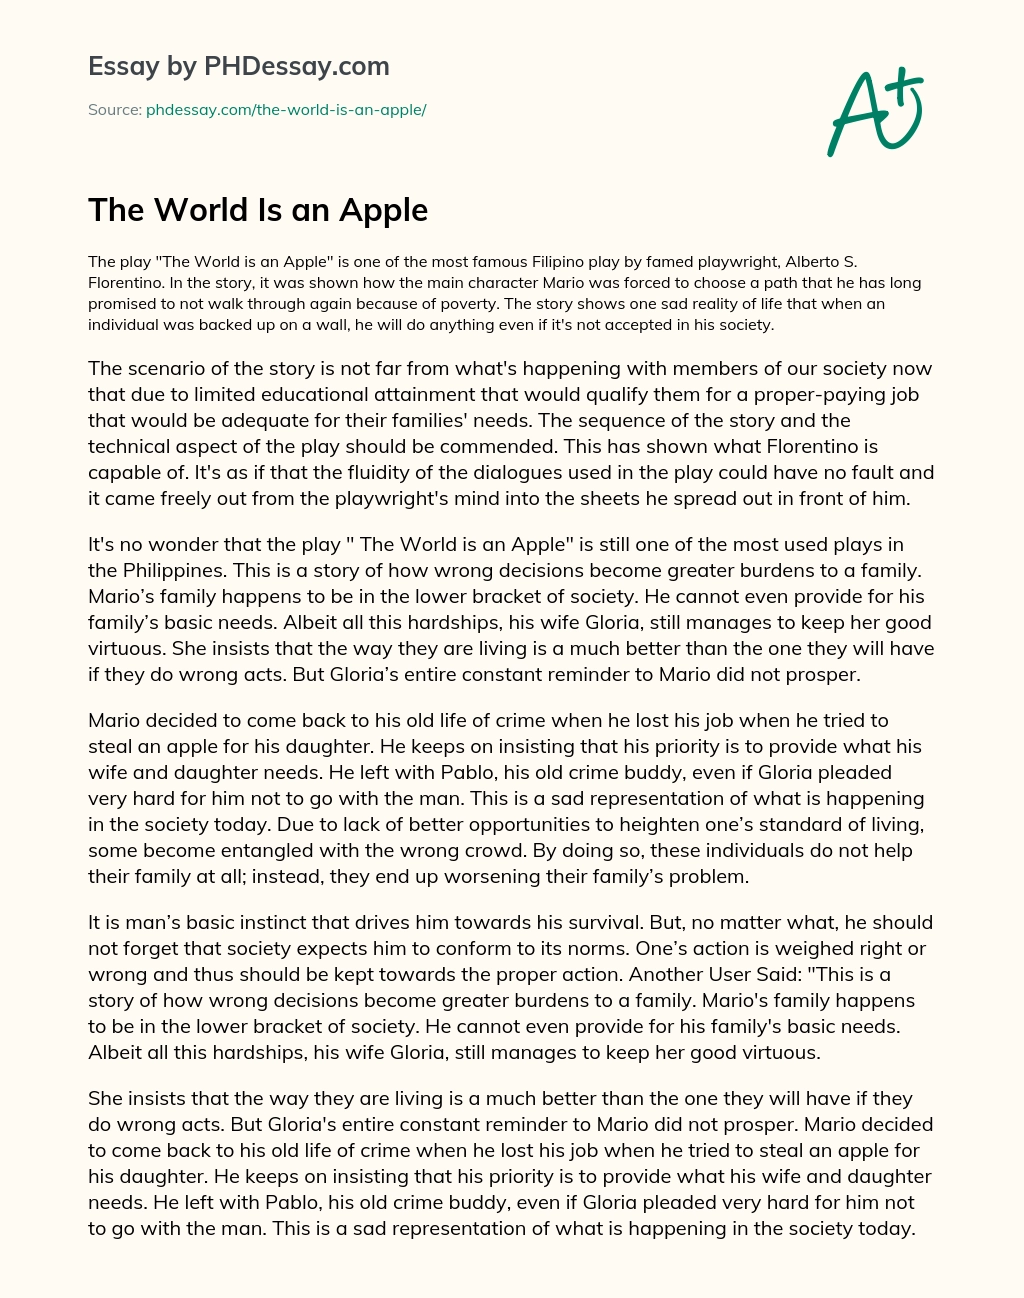 the world is an apple conflict